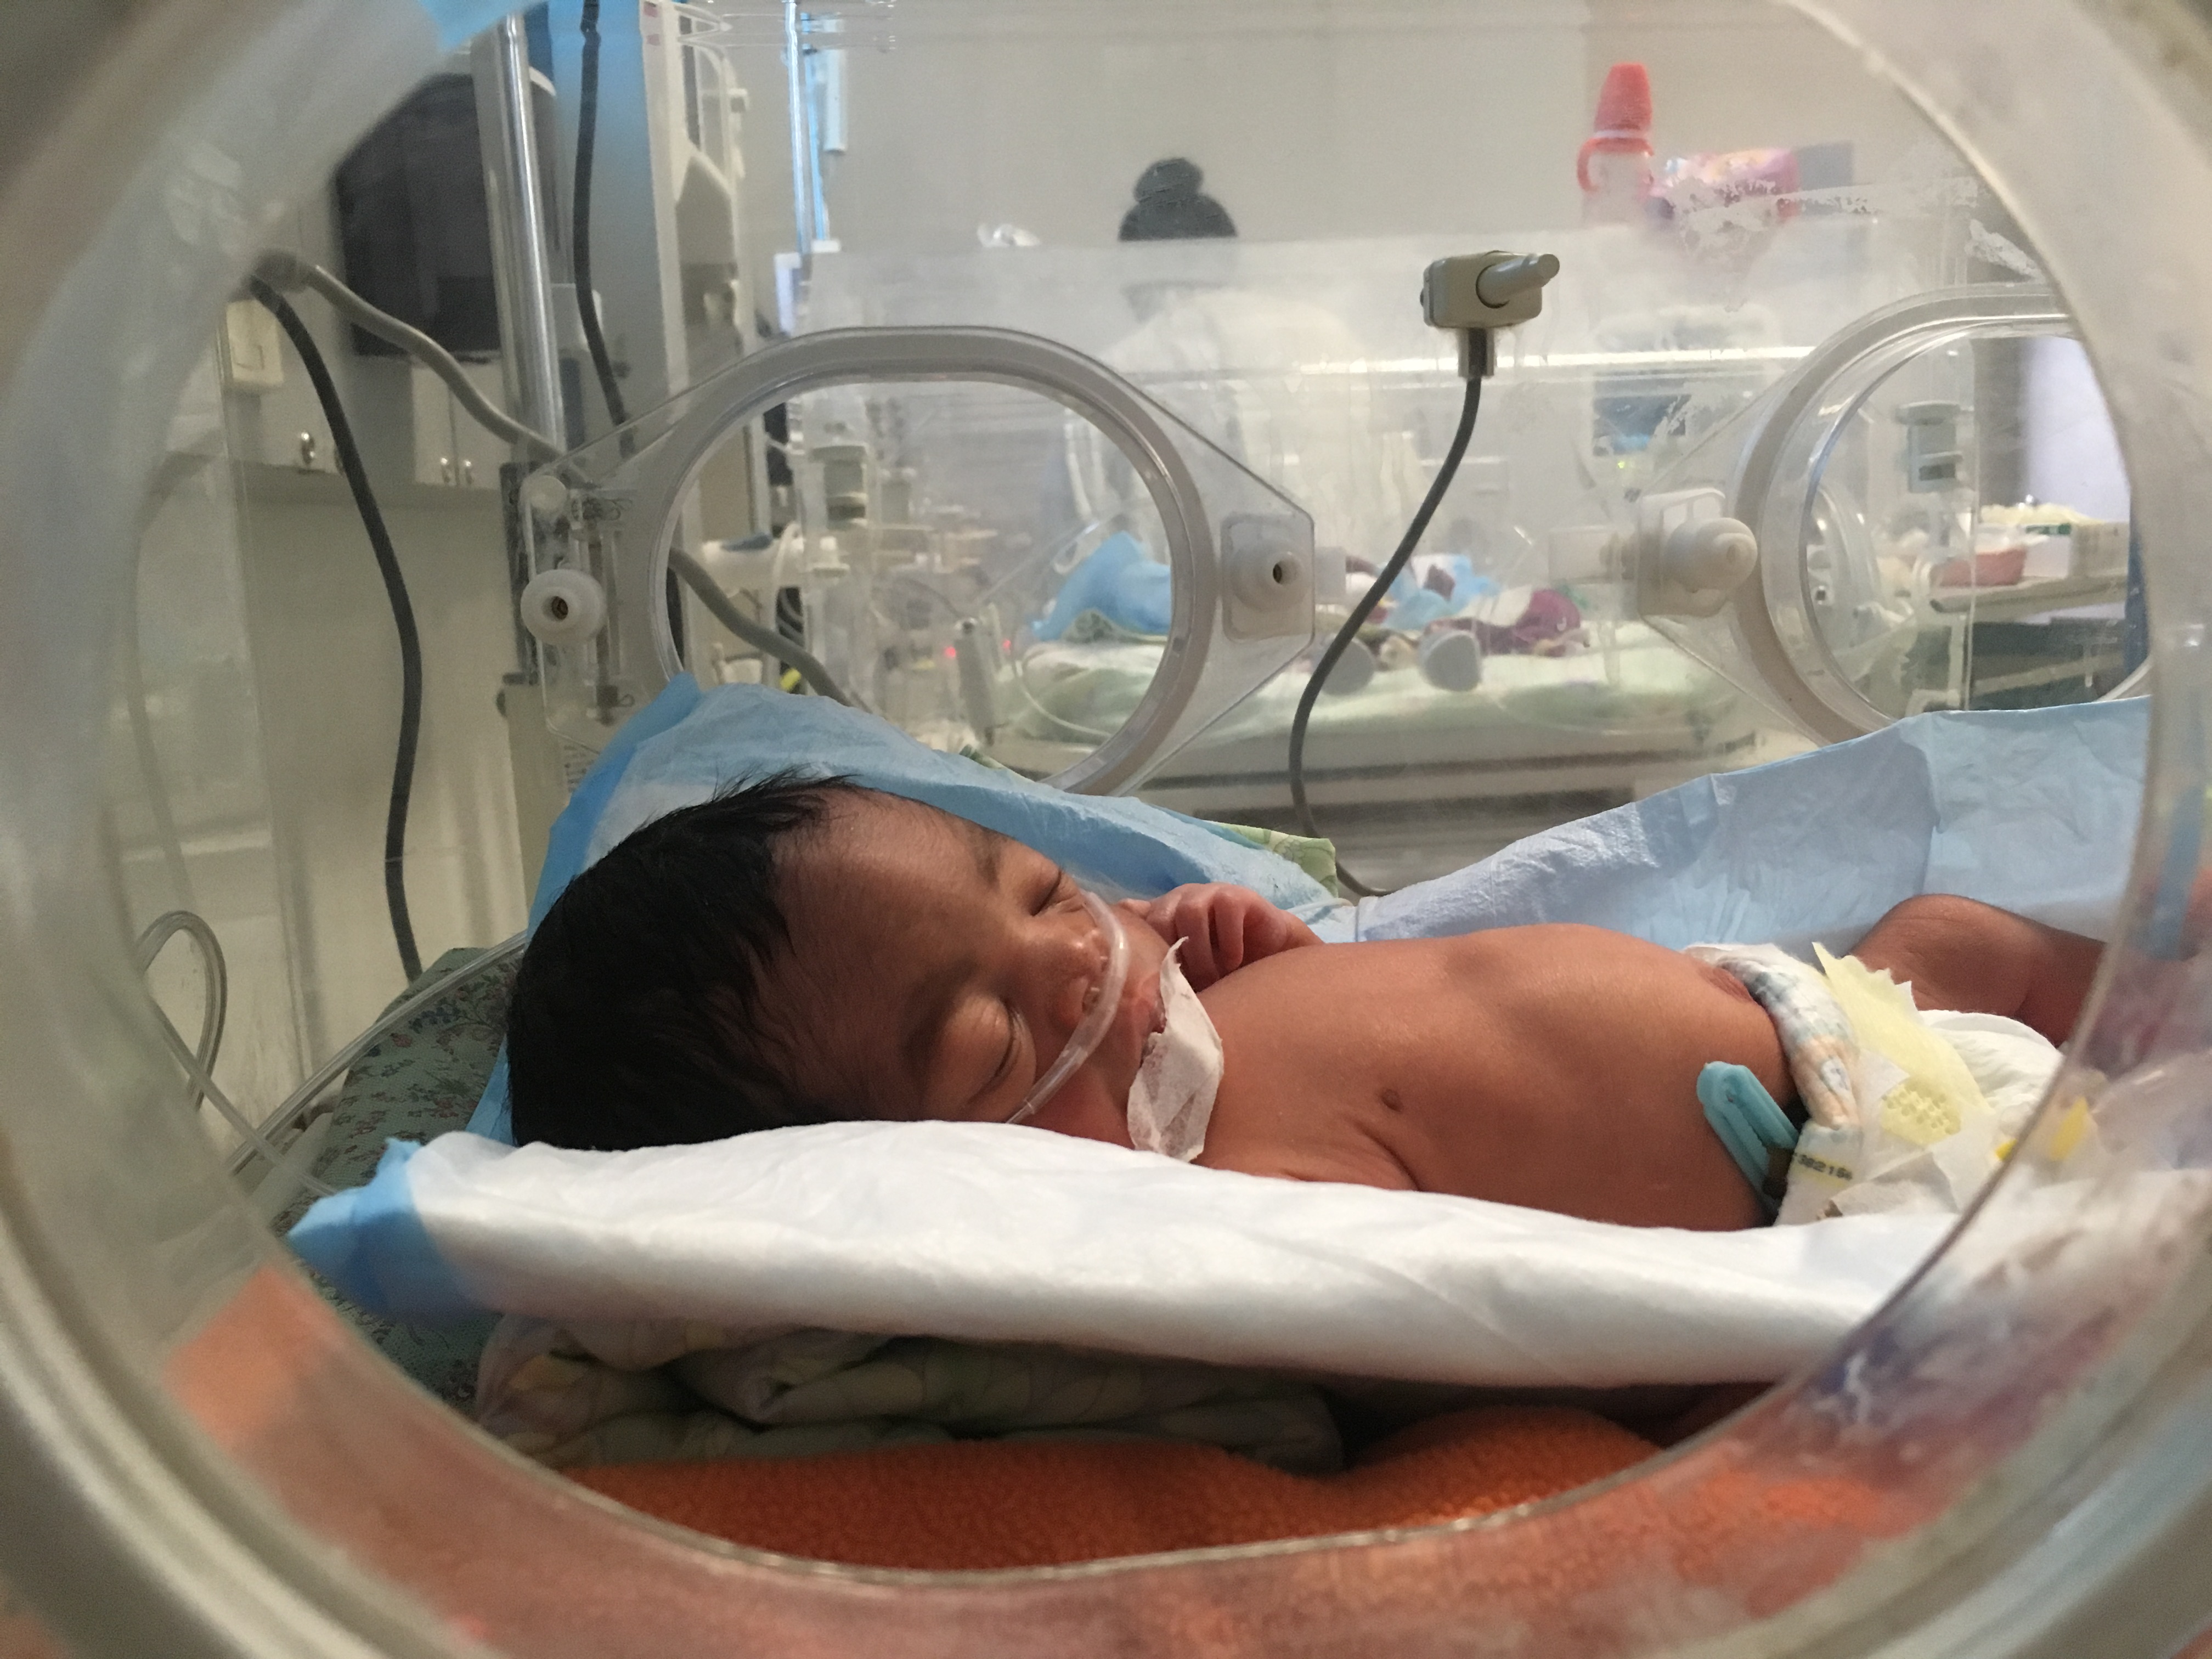 One of the quadruplets rests in an incubator in the NICU unit in University Hospital